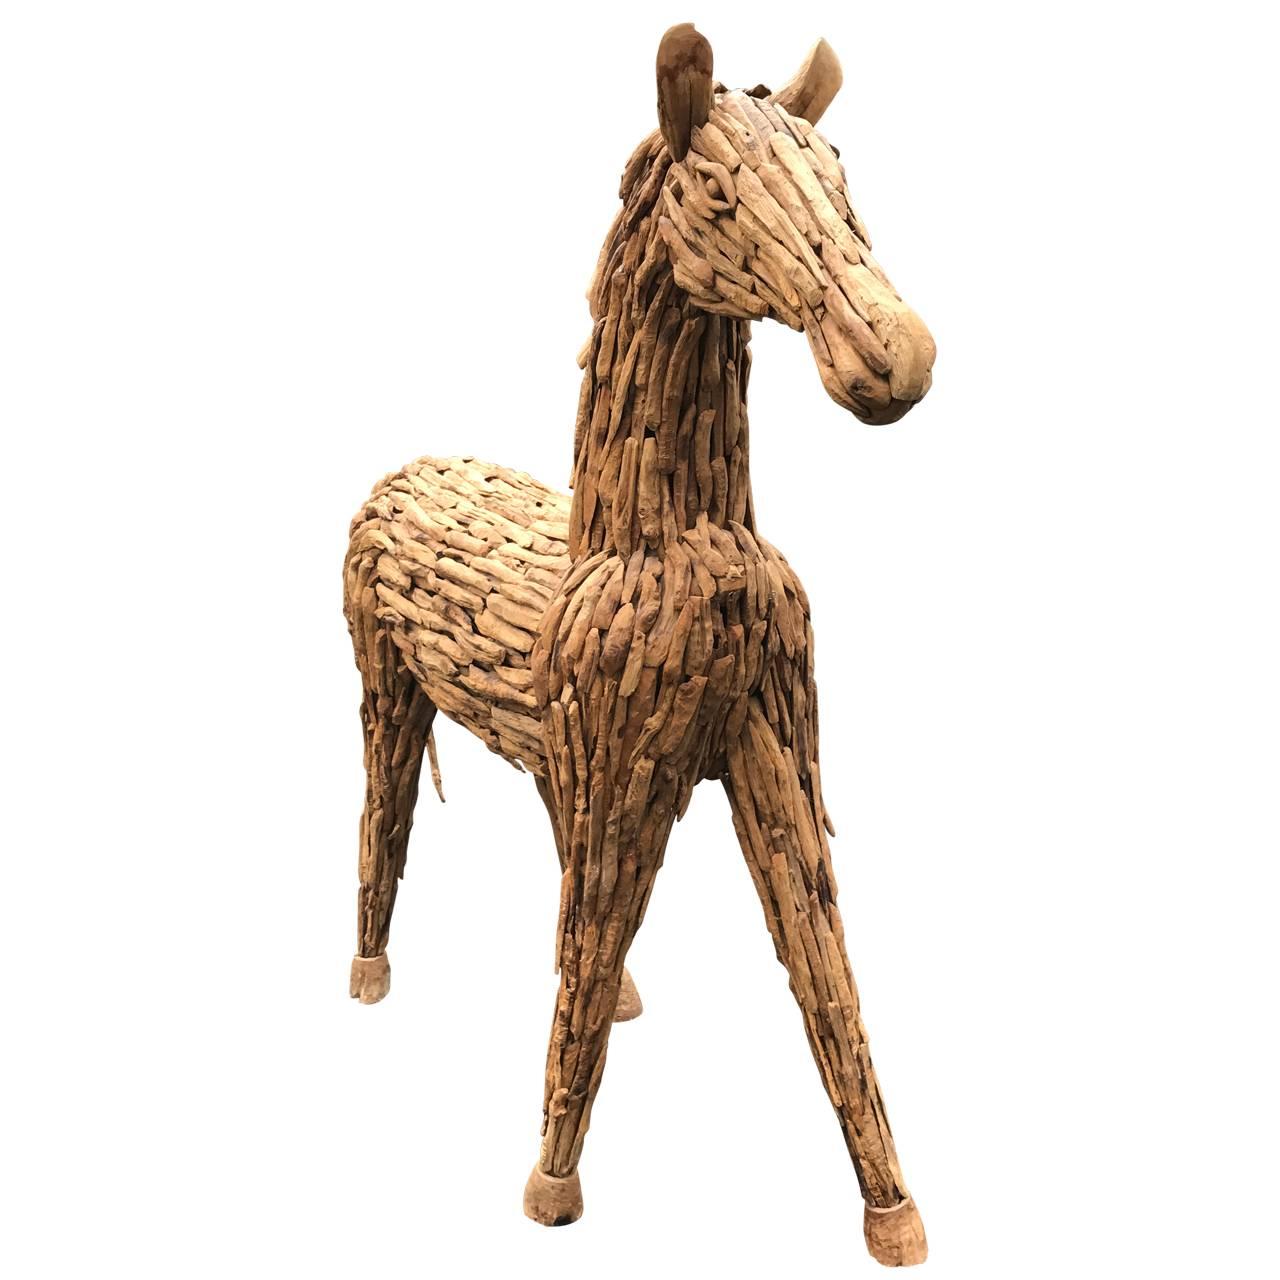 Hand-Crafted Lifesize Reclaimed Wood Equine Sculpture